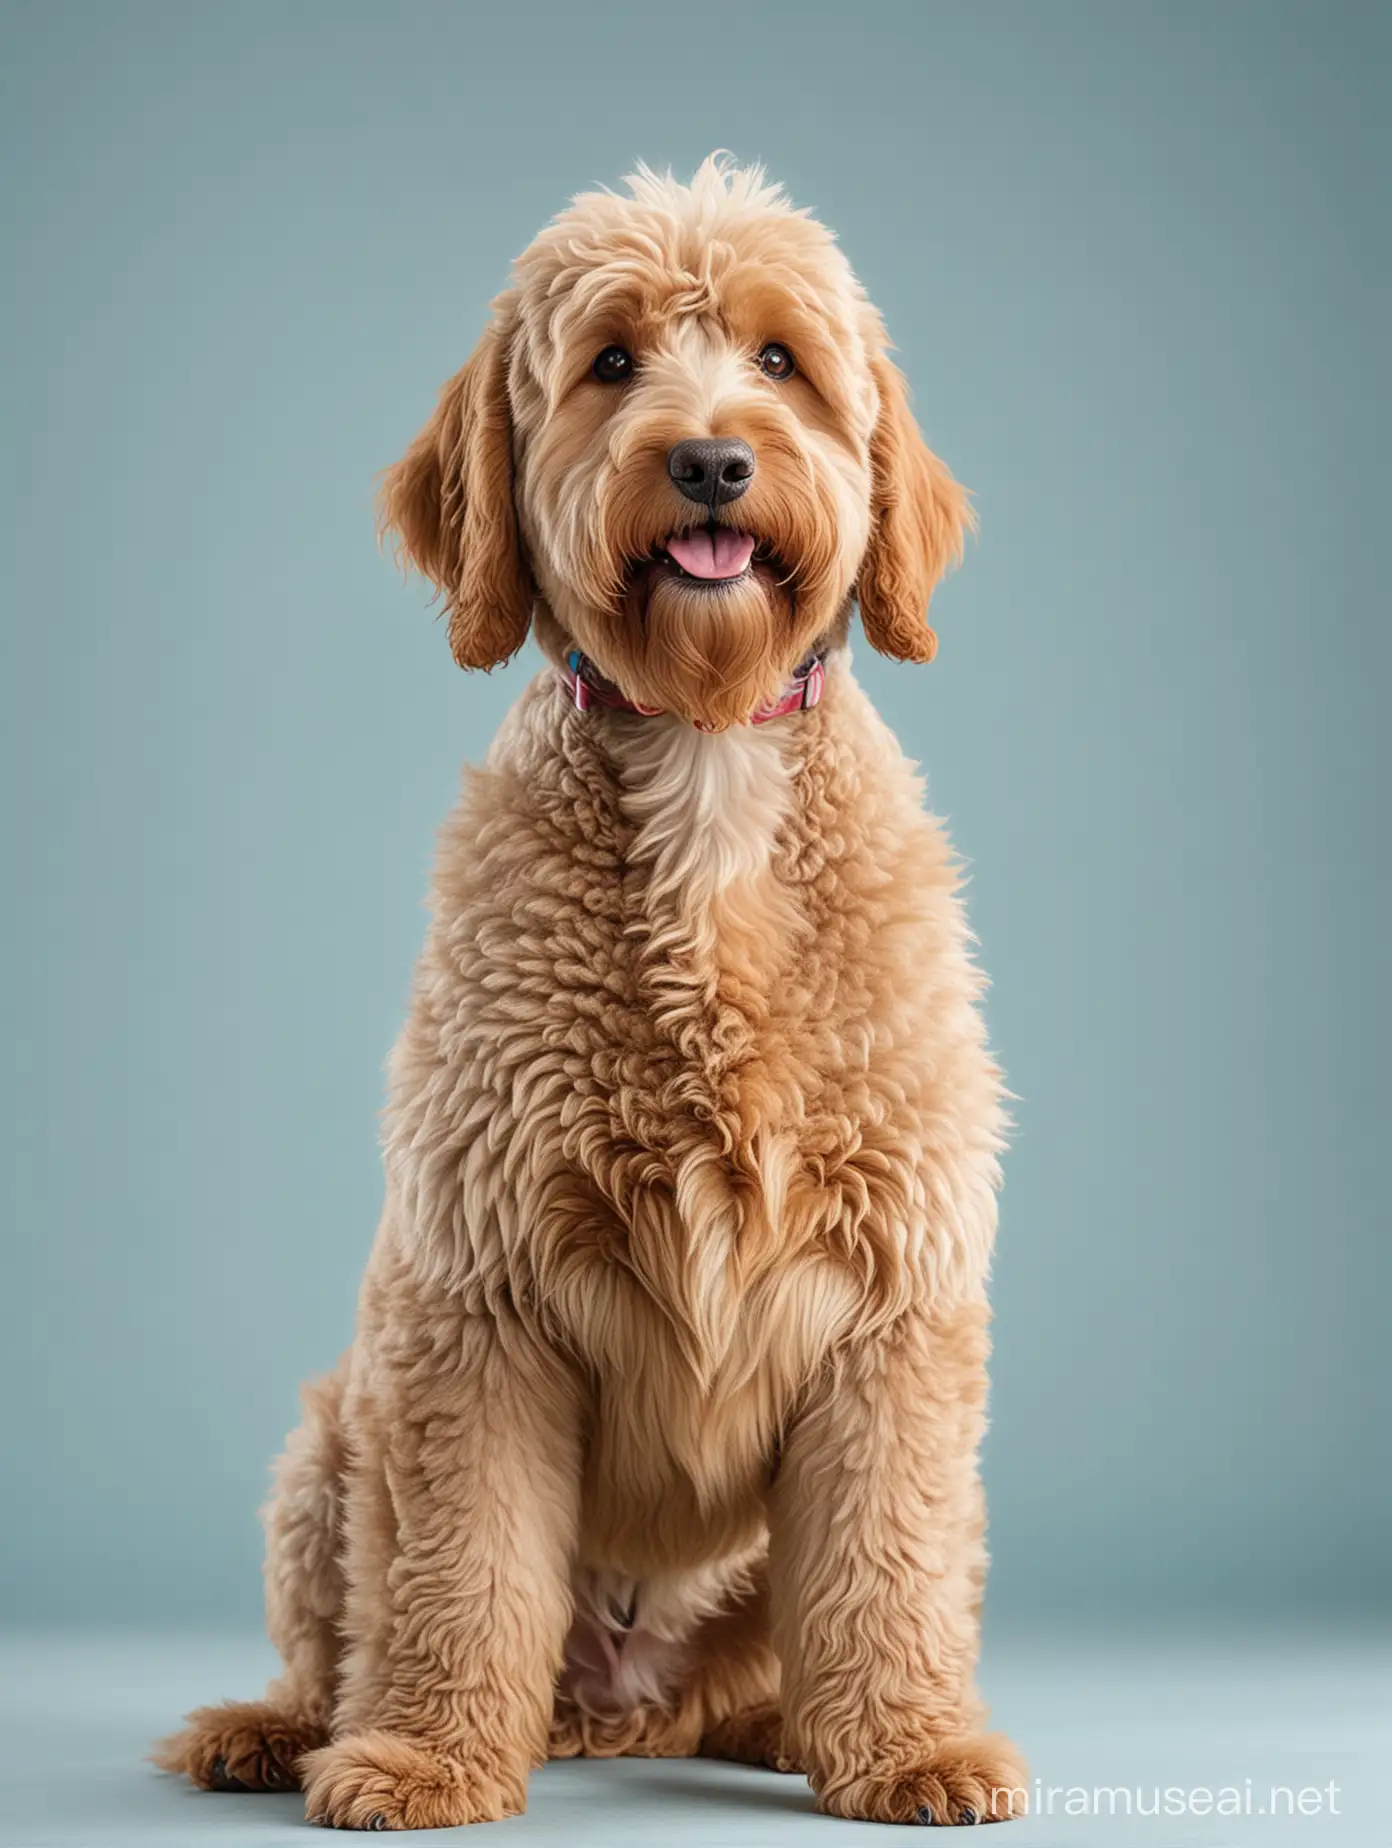 Happy Goldendoodle breed dog, the view is from behind, background is light blue